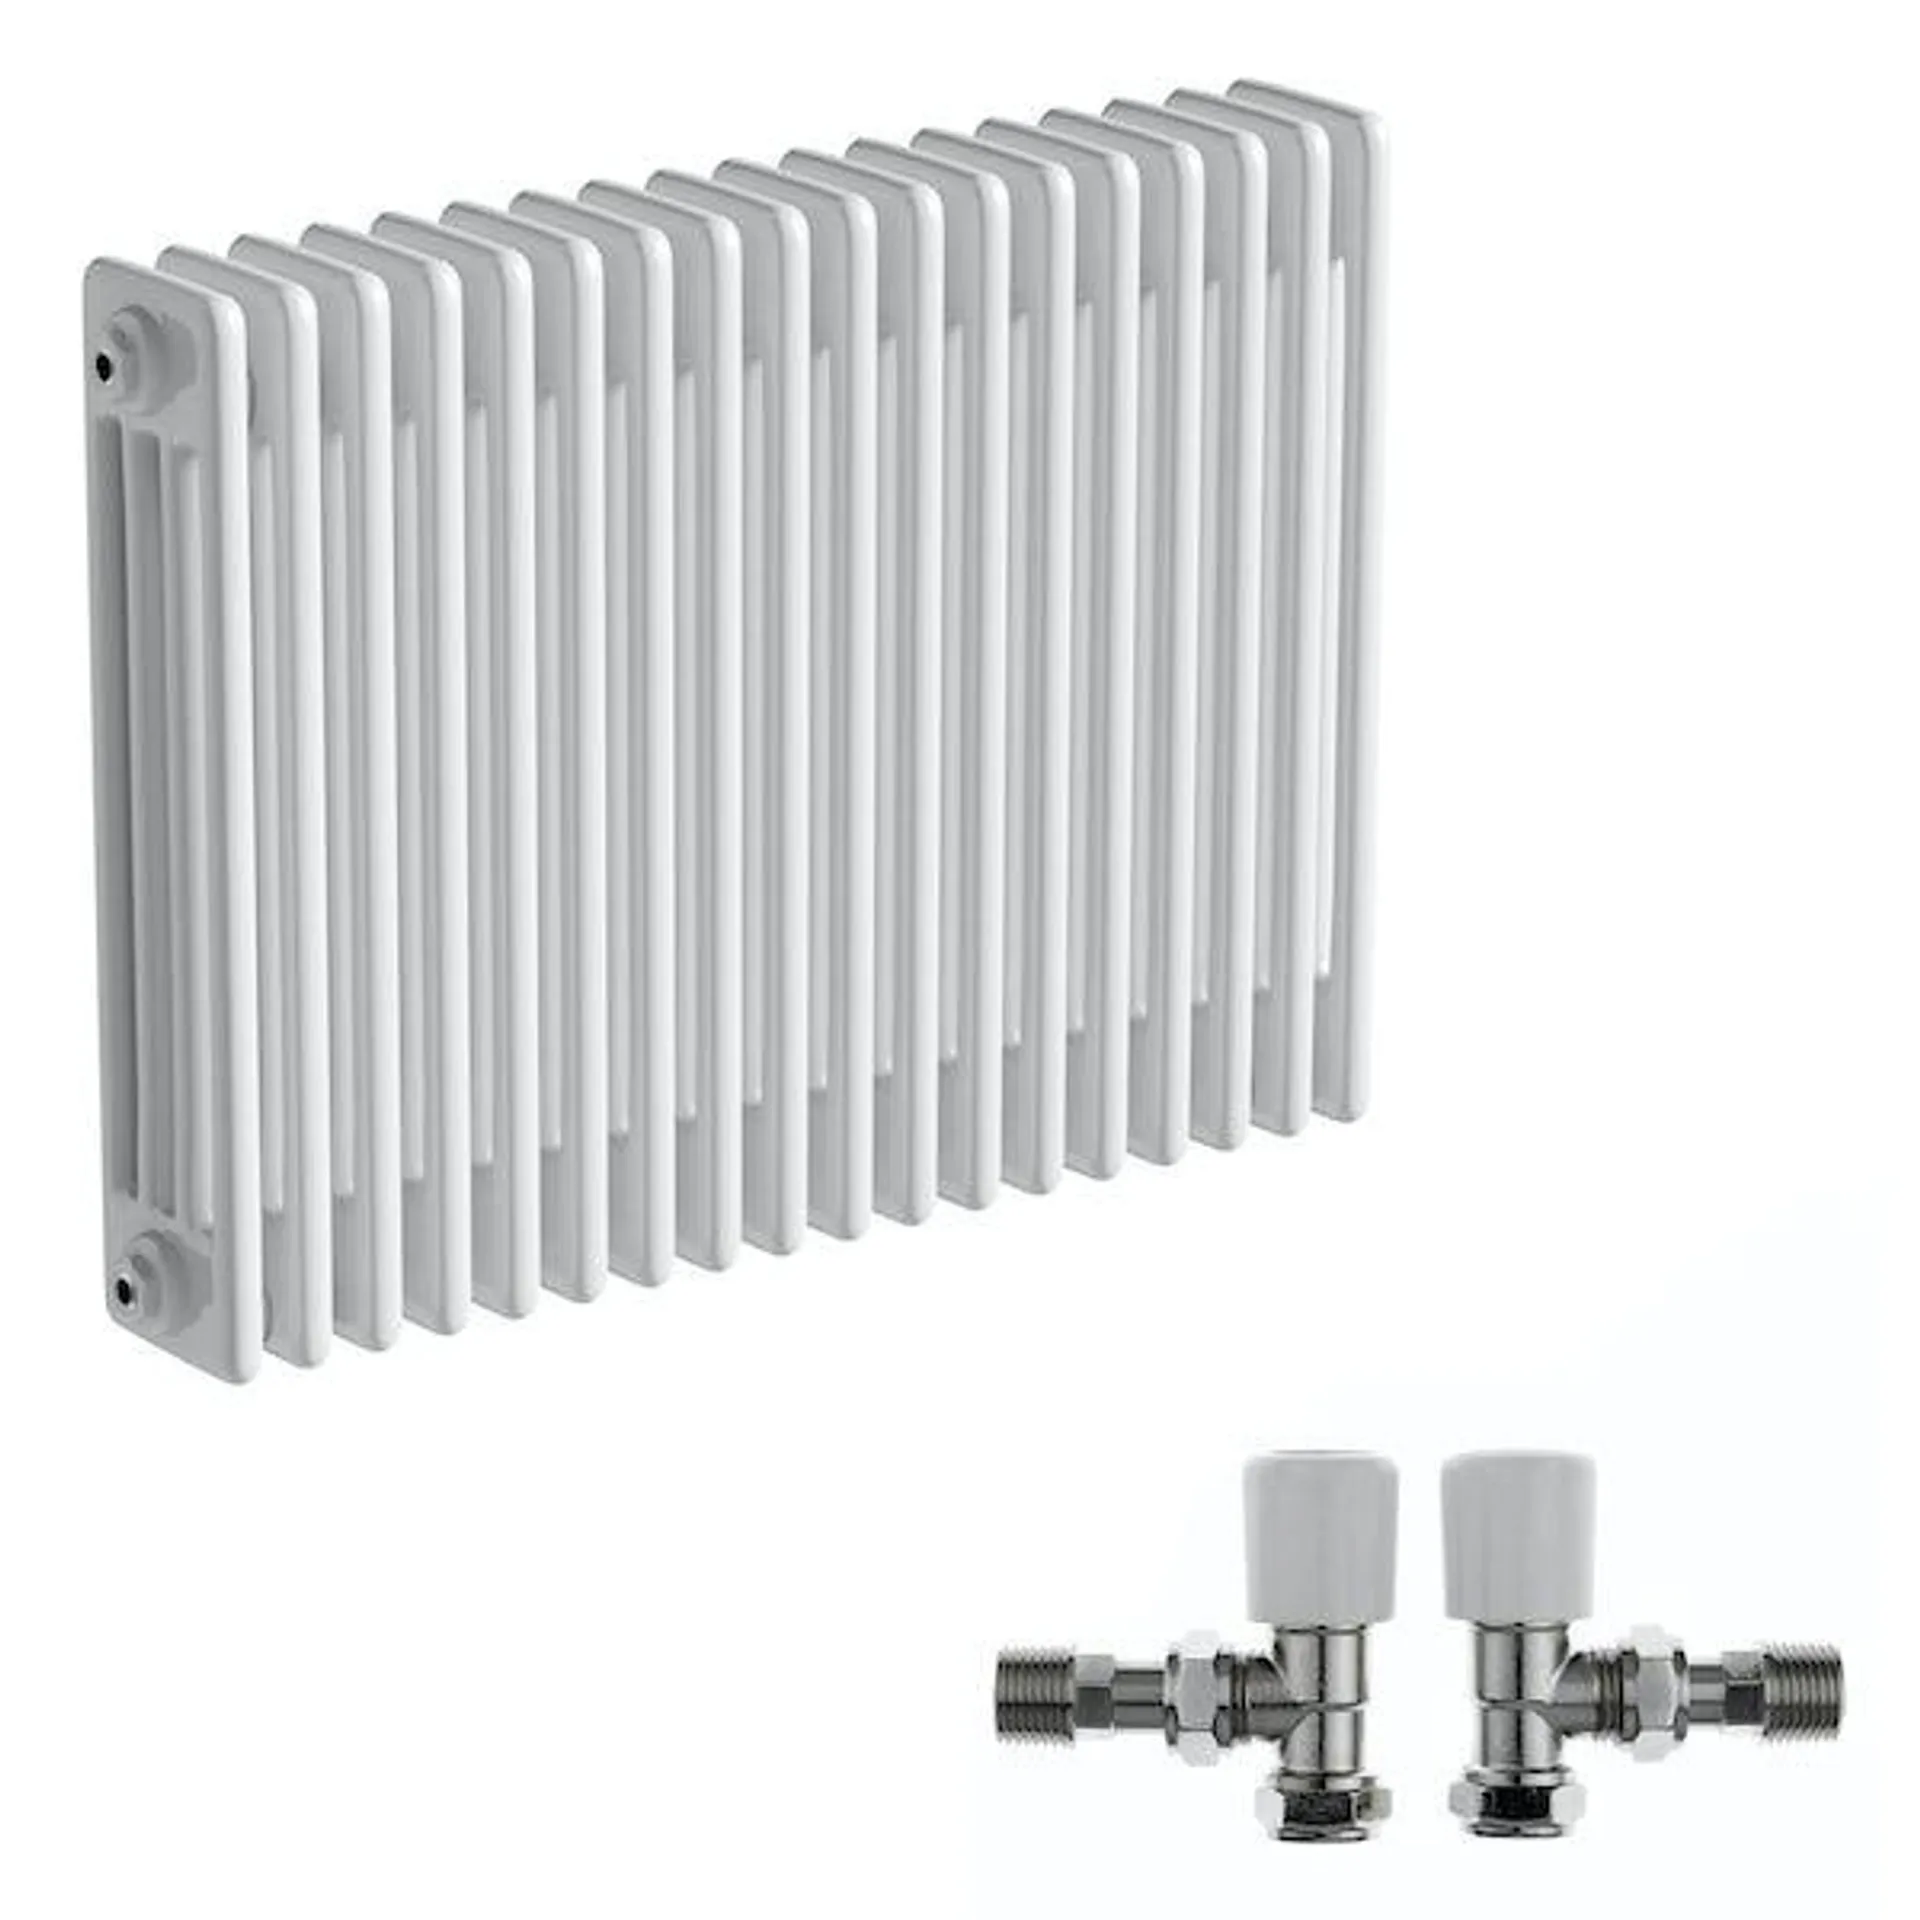 The Heating Co. Corso white 4 column radiator 600 x 834 with angled valves